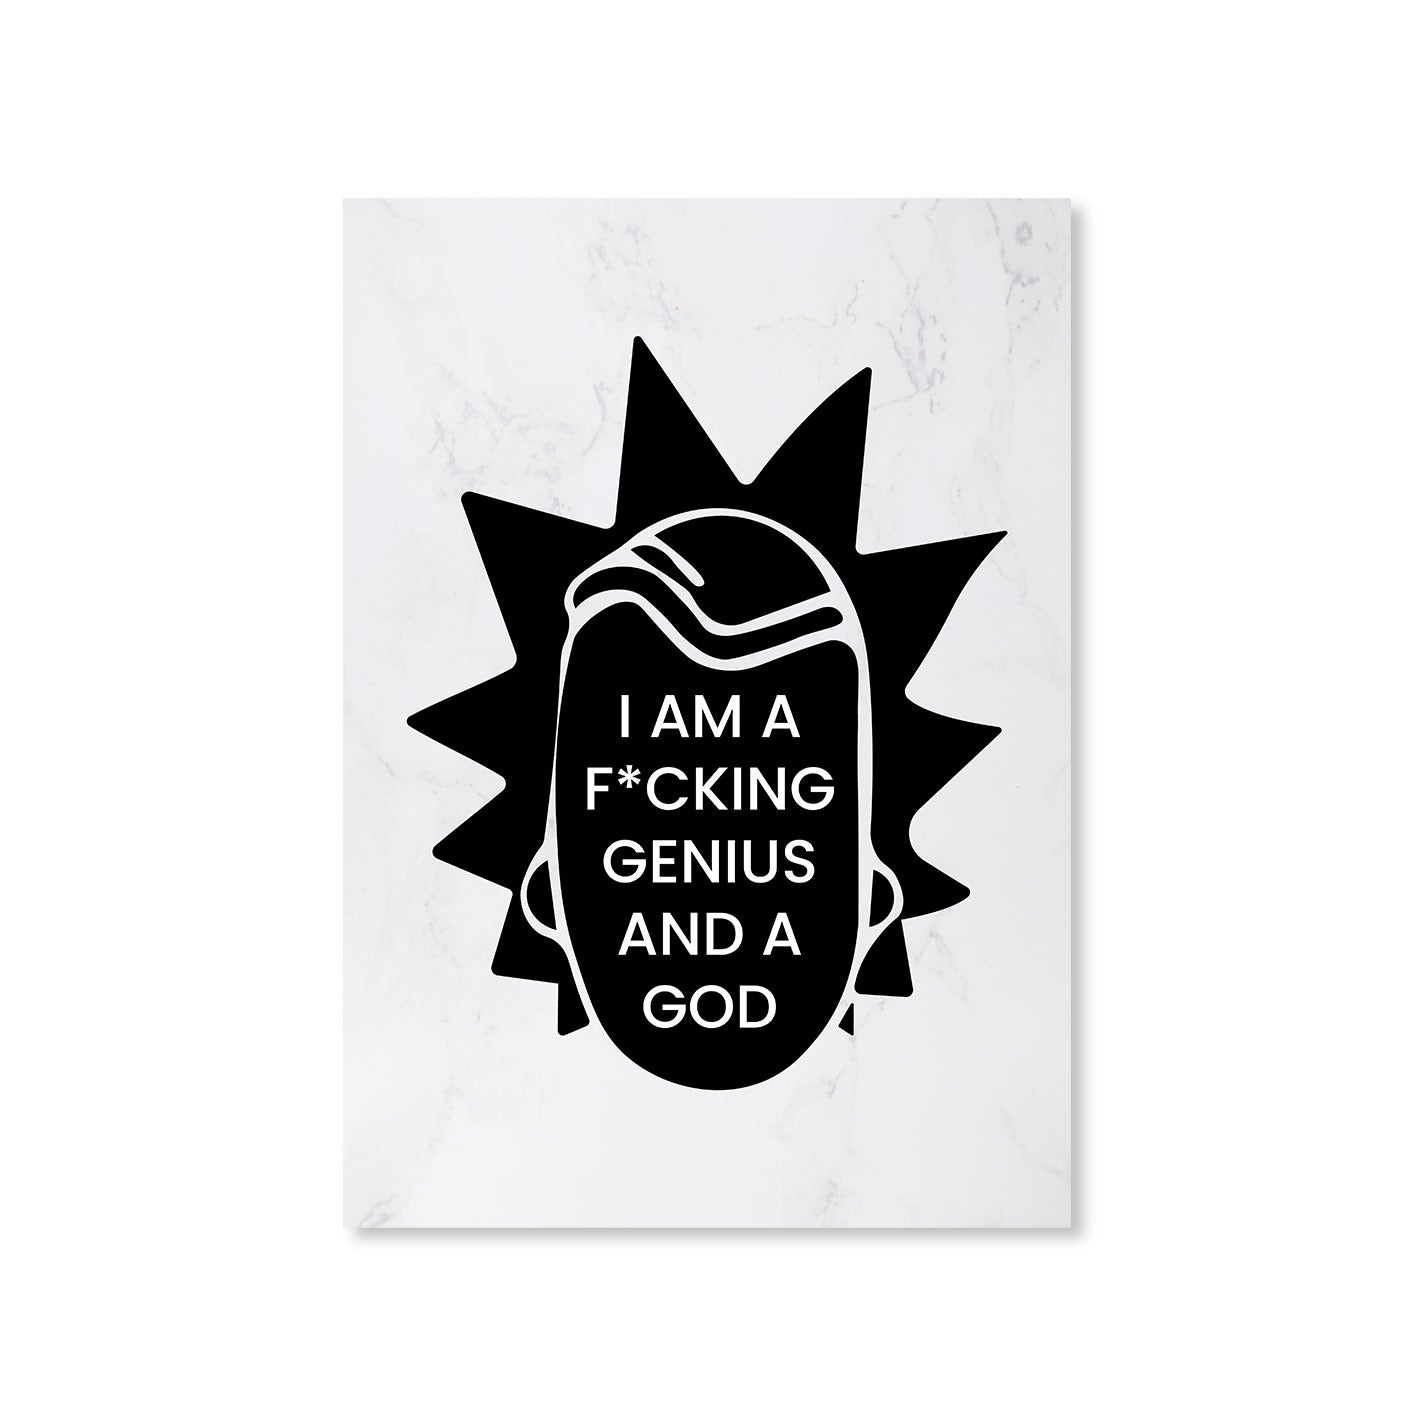 rick and morty genius poster wall art buy online united states of america usa the banyan tee tbt a4 rick and morty online summer beth mr meeseeks jerry quote vector art clothing accessories merchandise